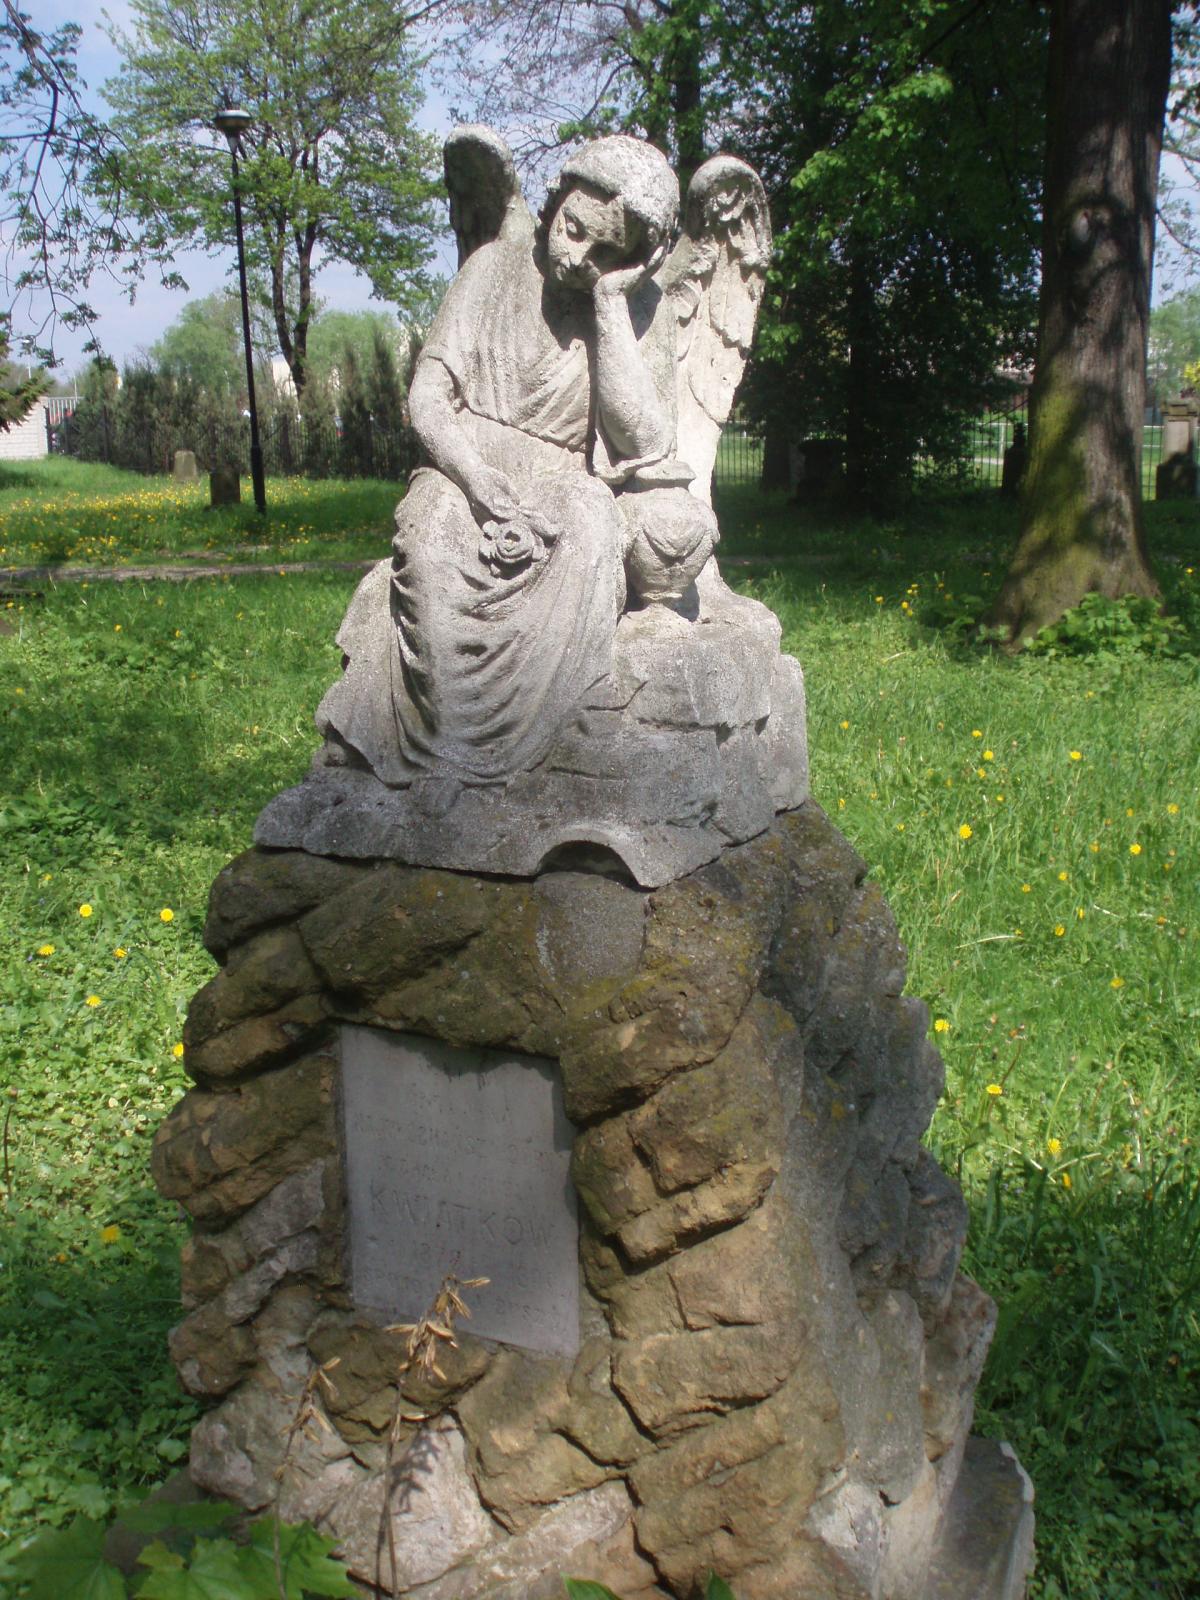 Wikipedia, Cemeteries in Rzeszw, Grave sculptures of angels in Poland, Self-published work